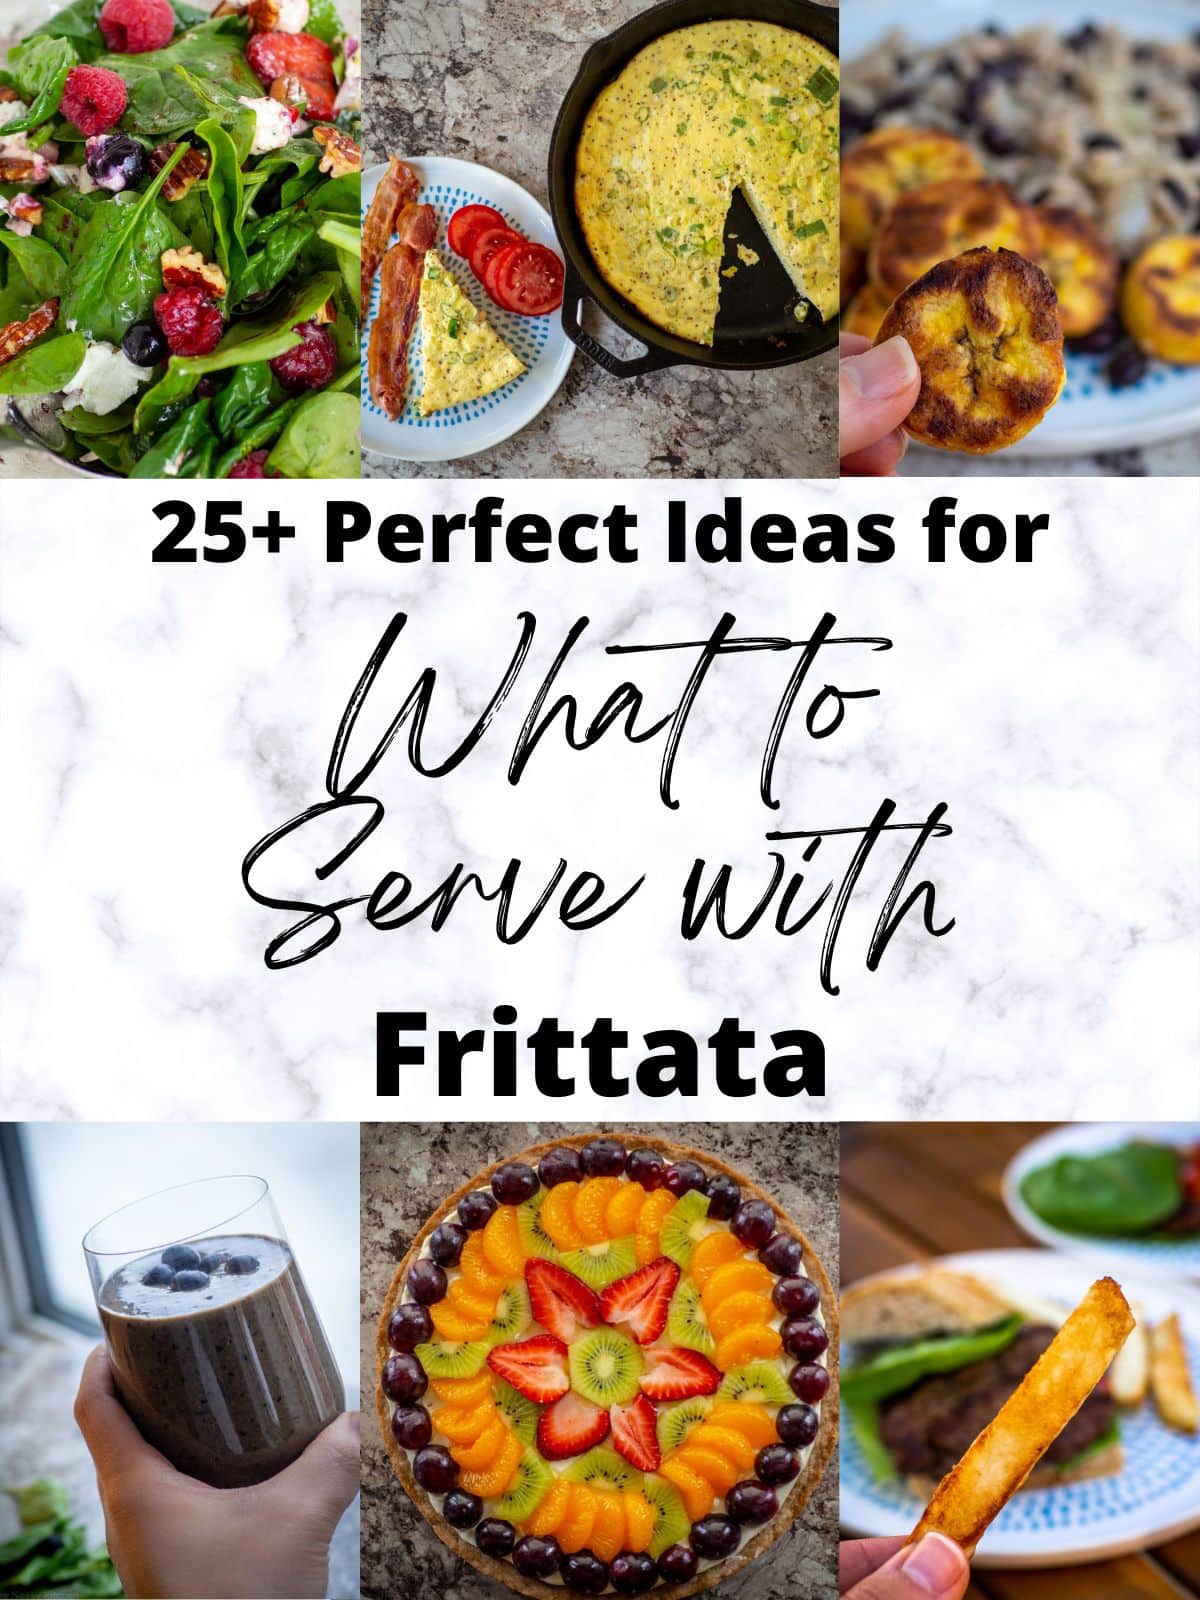 Collage of ideas to serve with frittata including salad, plantains, muffins and a smoothie.